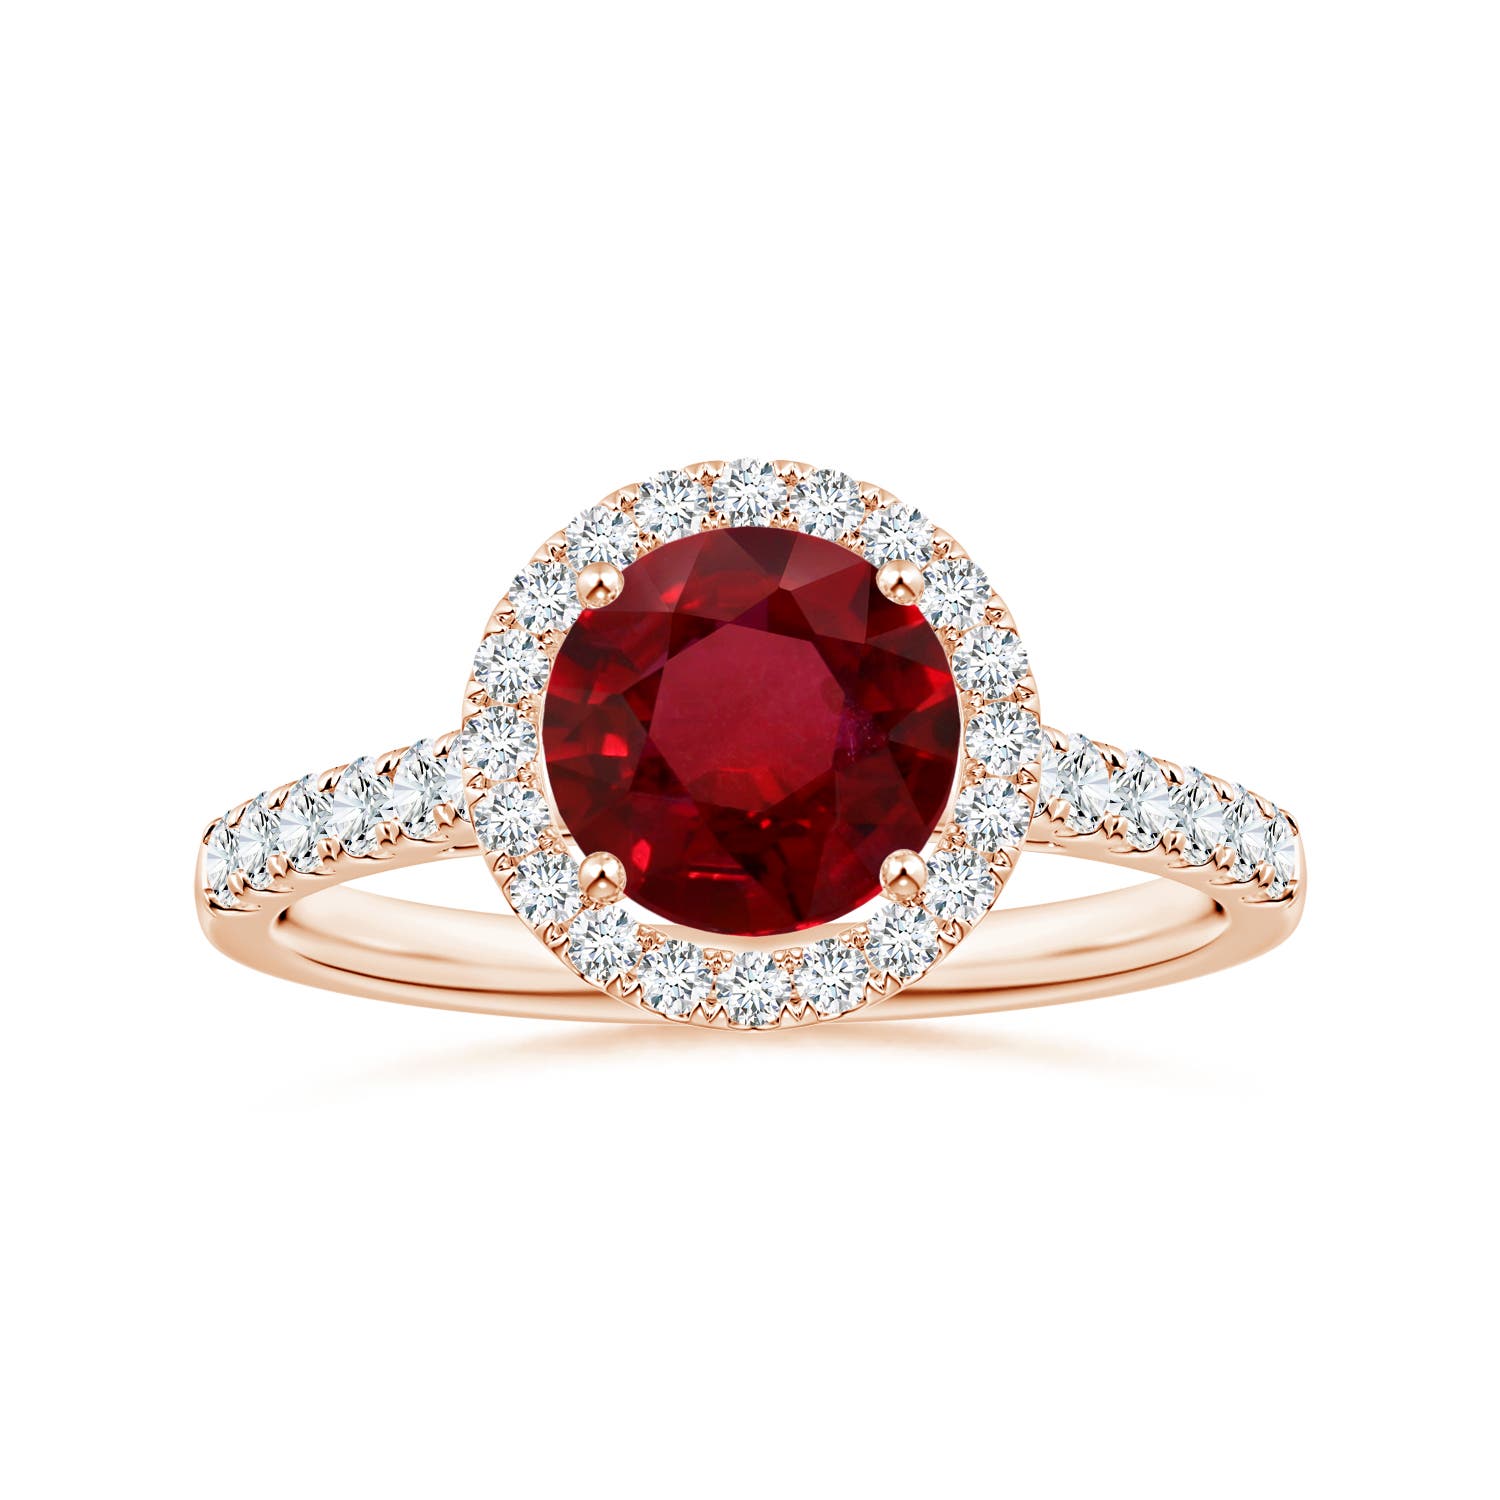 ANGARA GIA Certified Natural 1.54ct Ruby Halo Ring with Diamond in Rose Gold